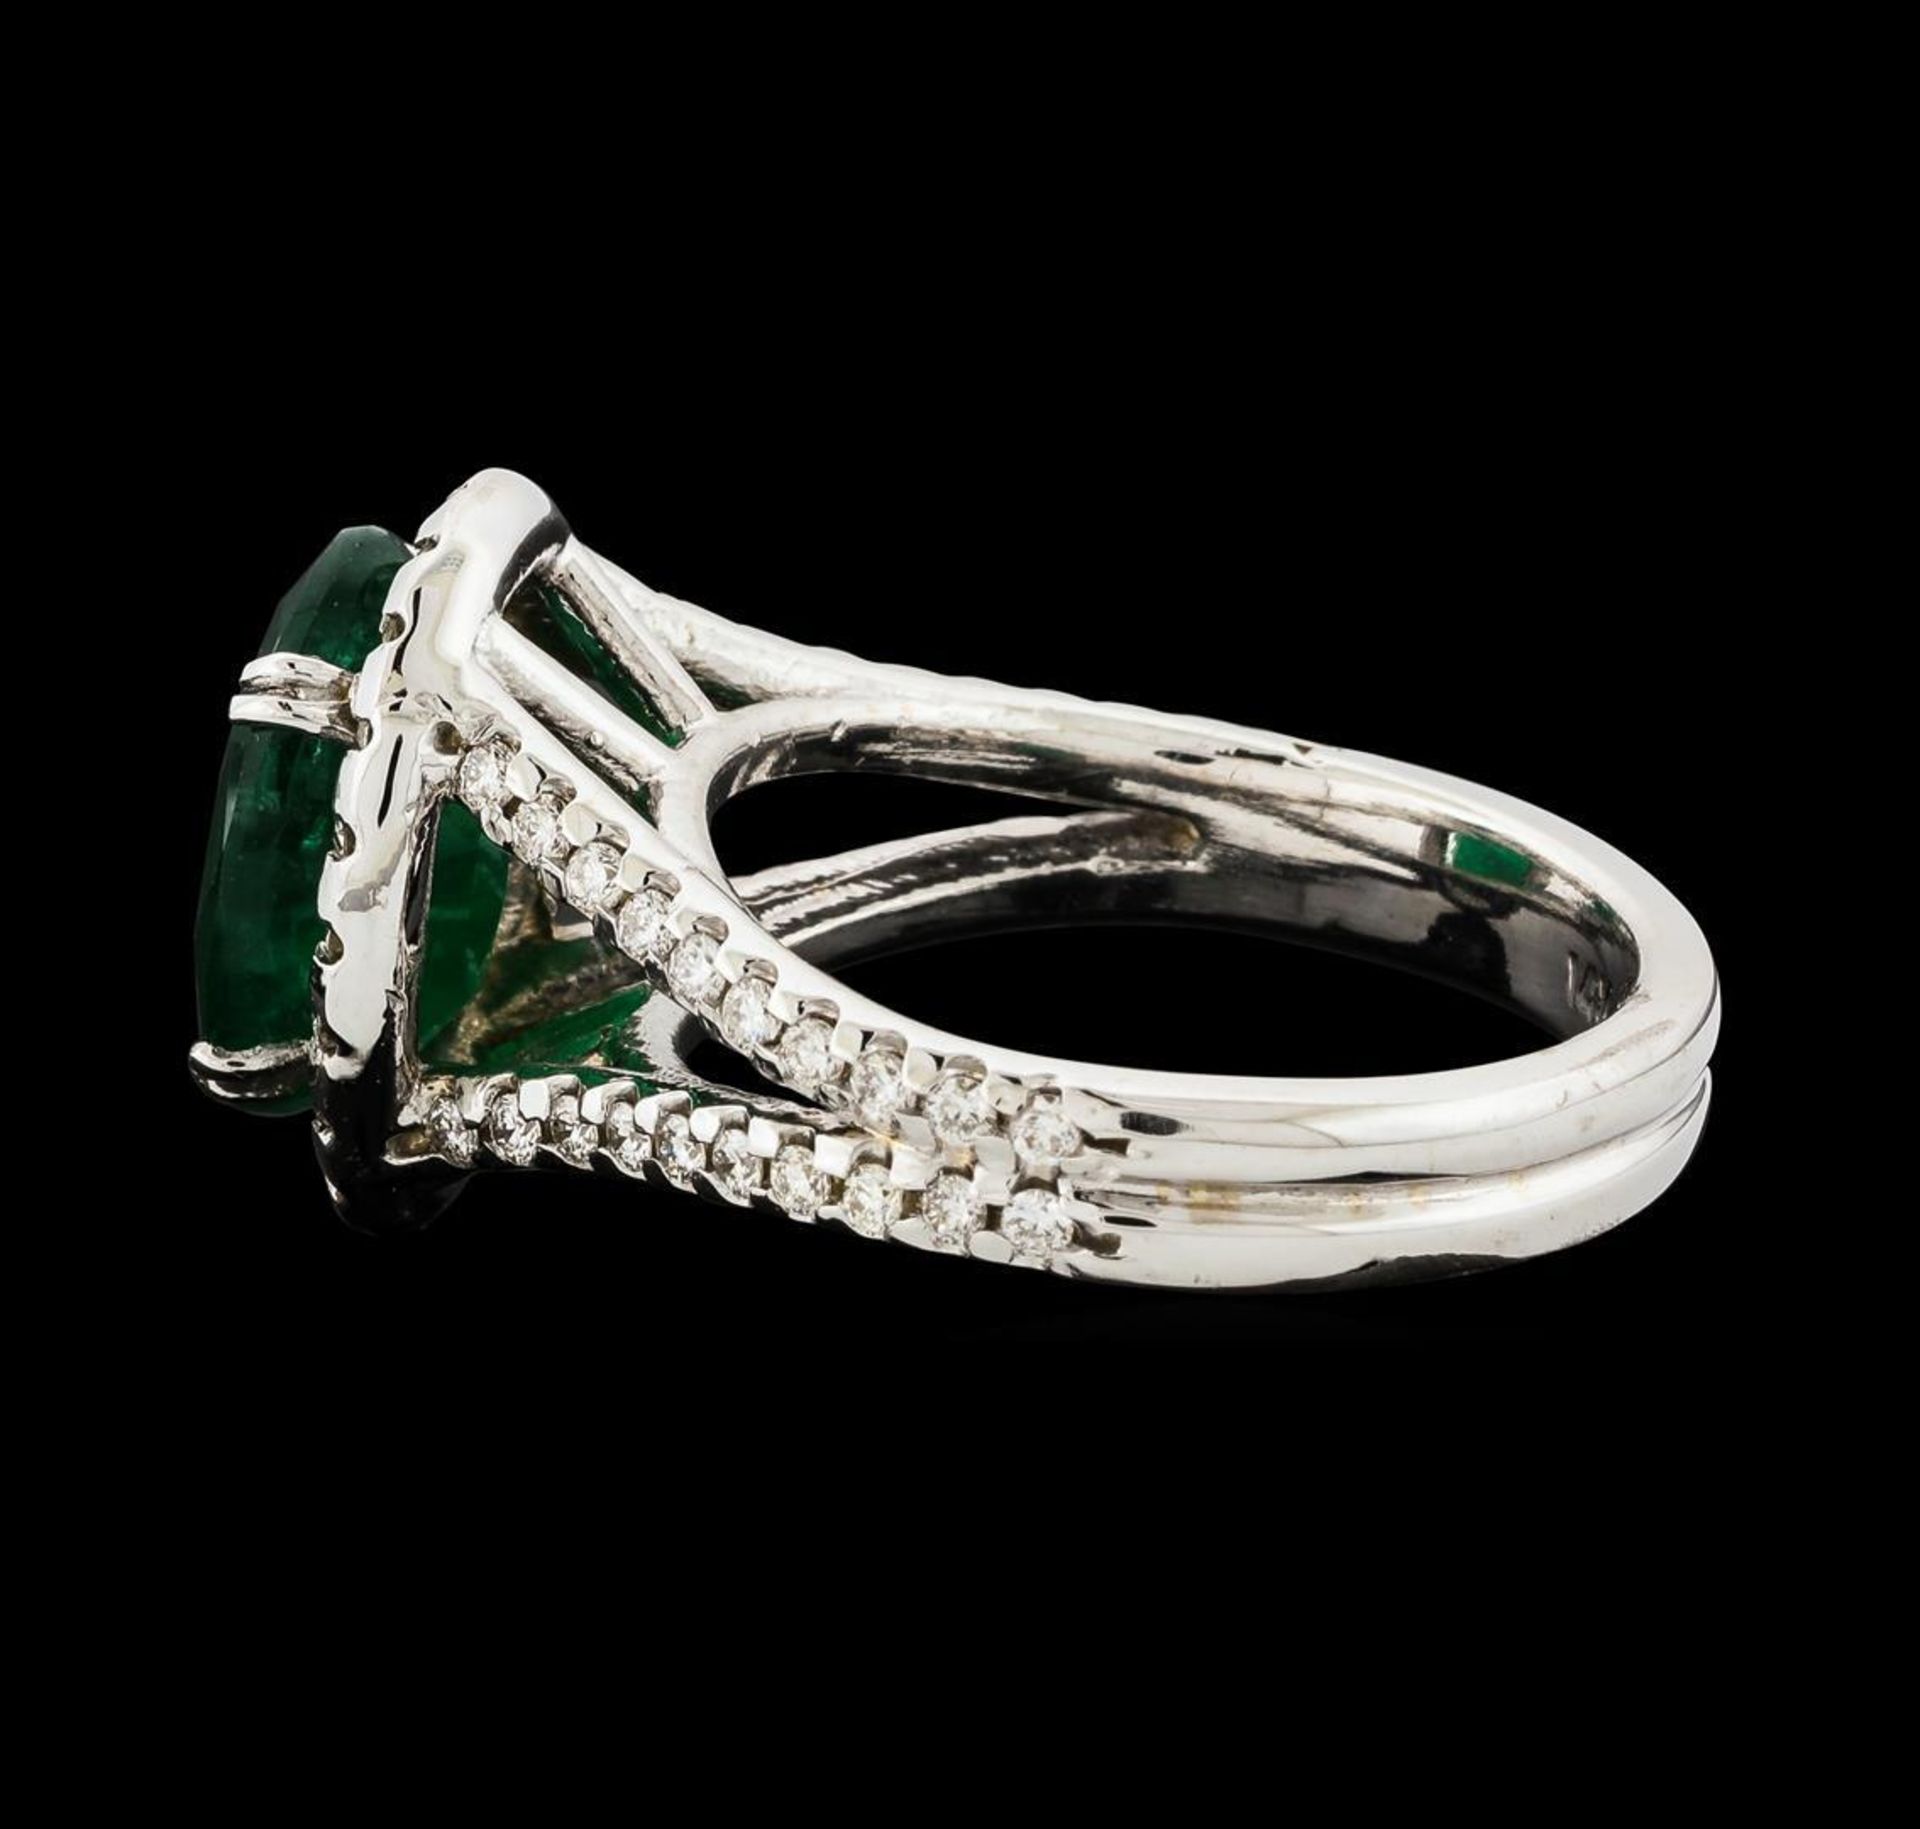 3.70 ctw Emerald and Diamond Ring - 14KT White Gold - Image 3 of 5